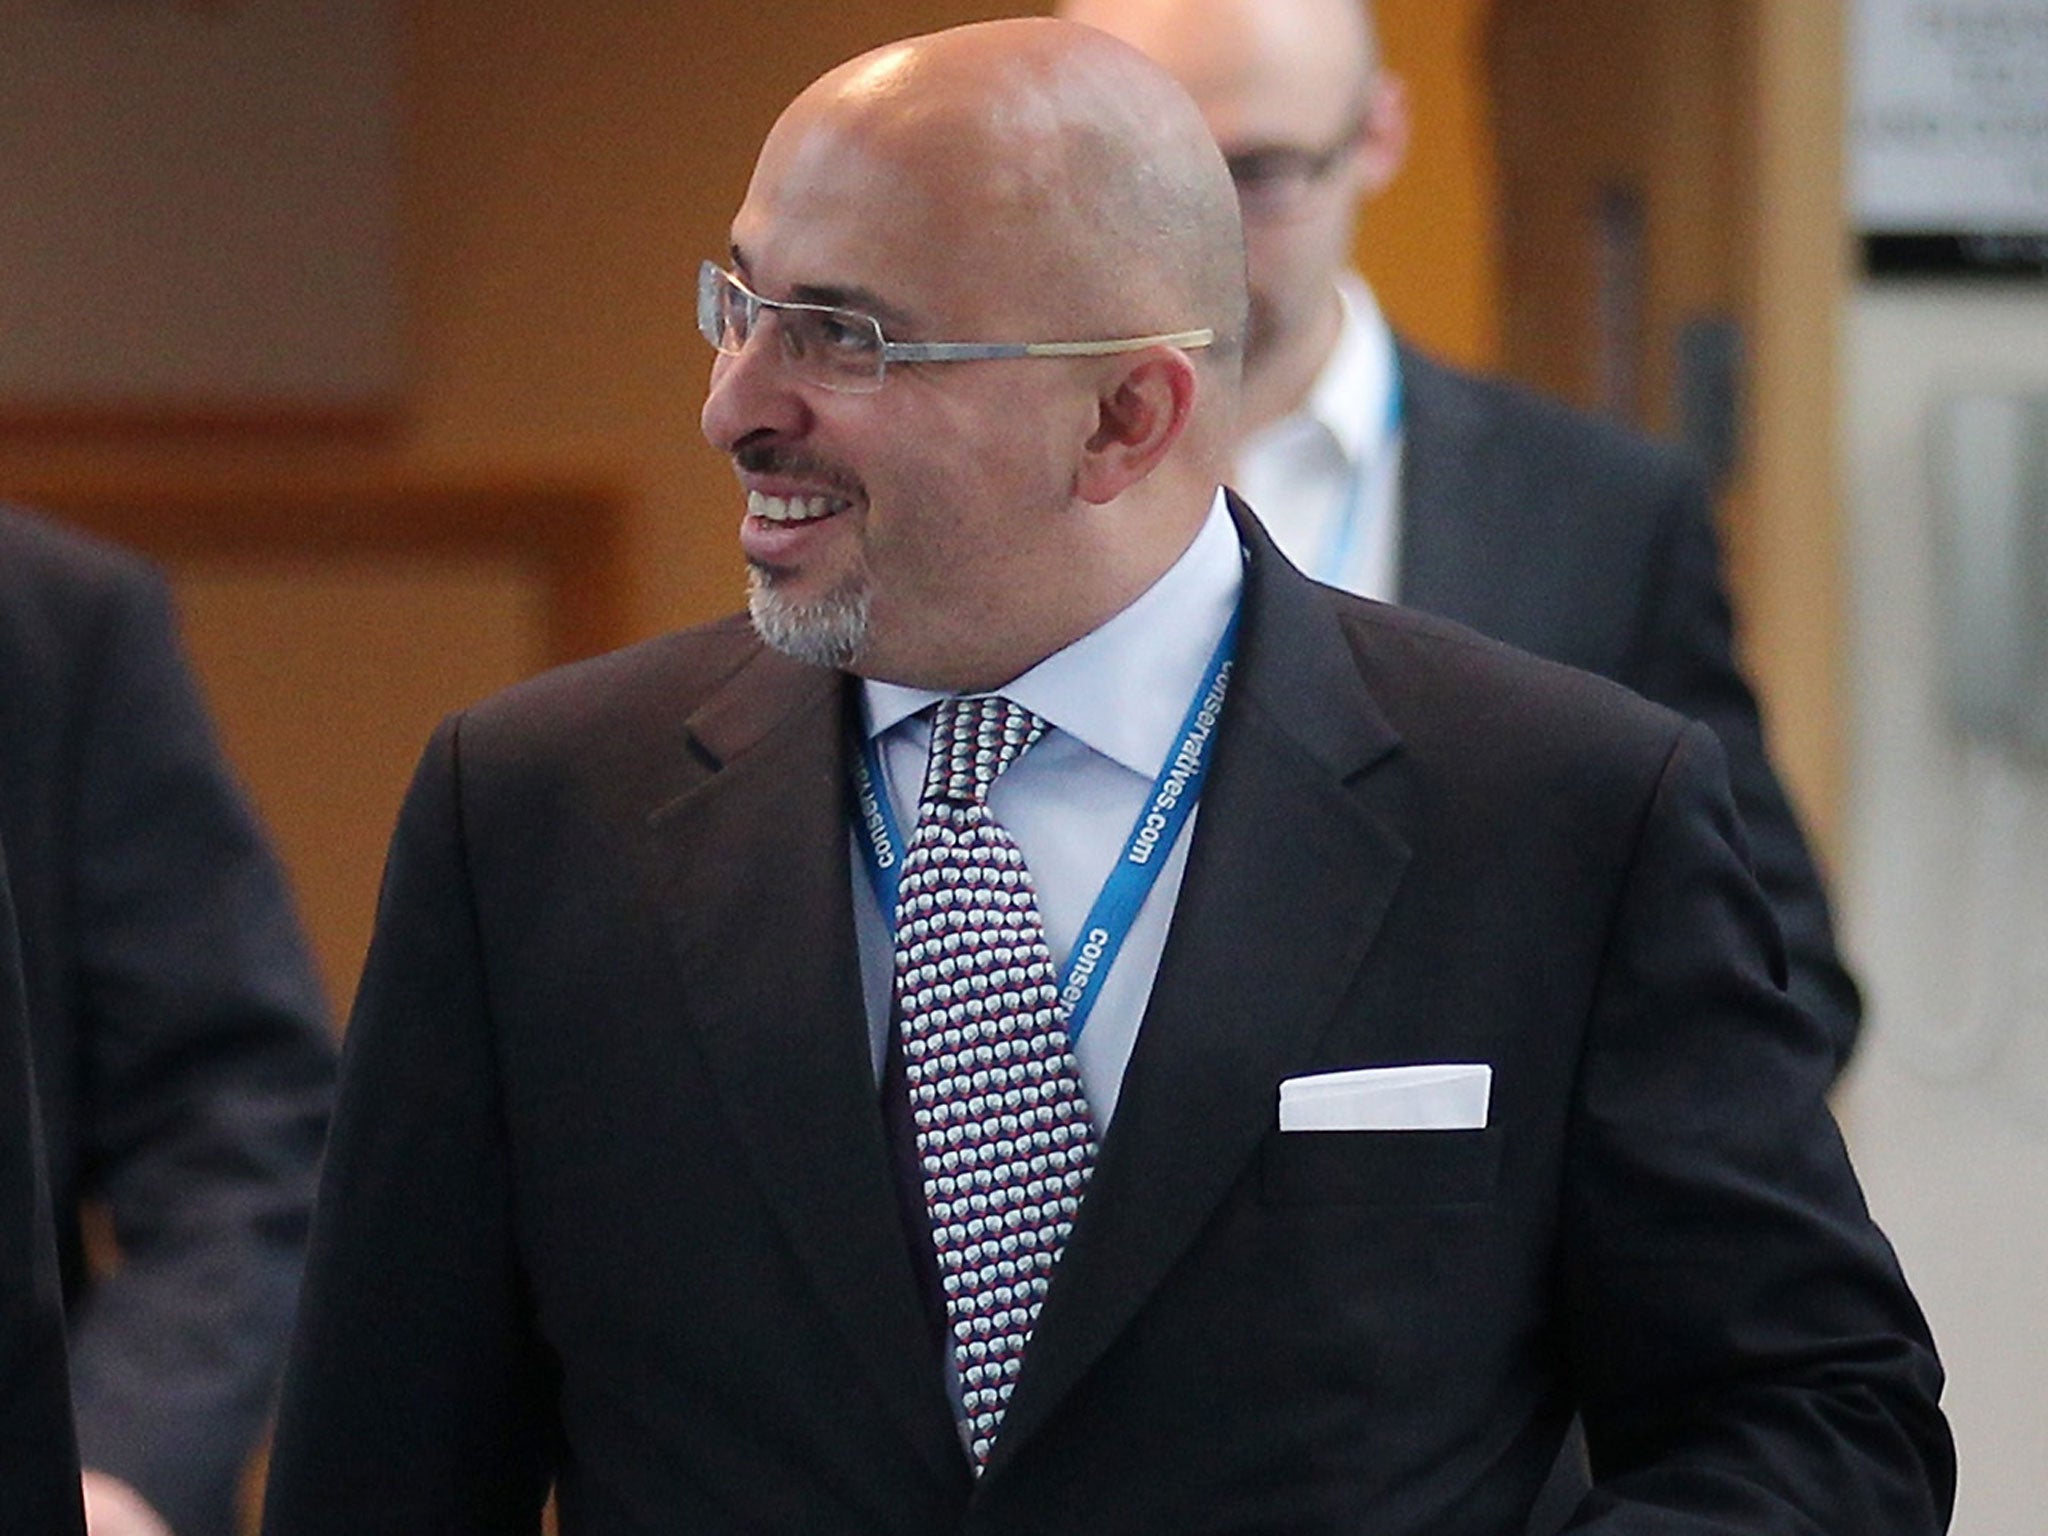 Nadhim Zahawi said he was 'mortified' to discover the expenses for heating his second home were incorrectly claimed